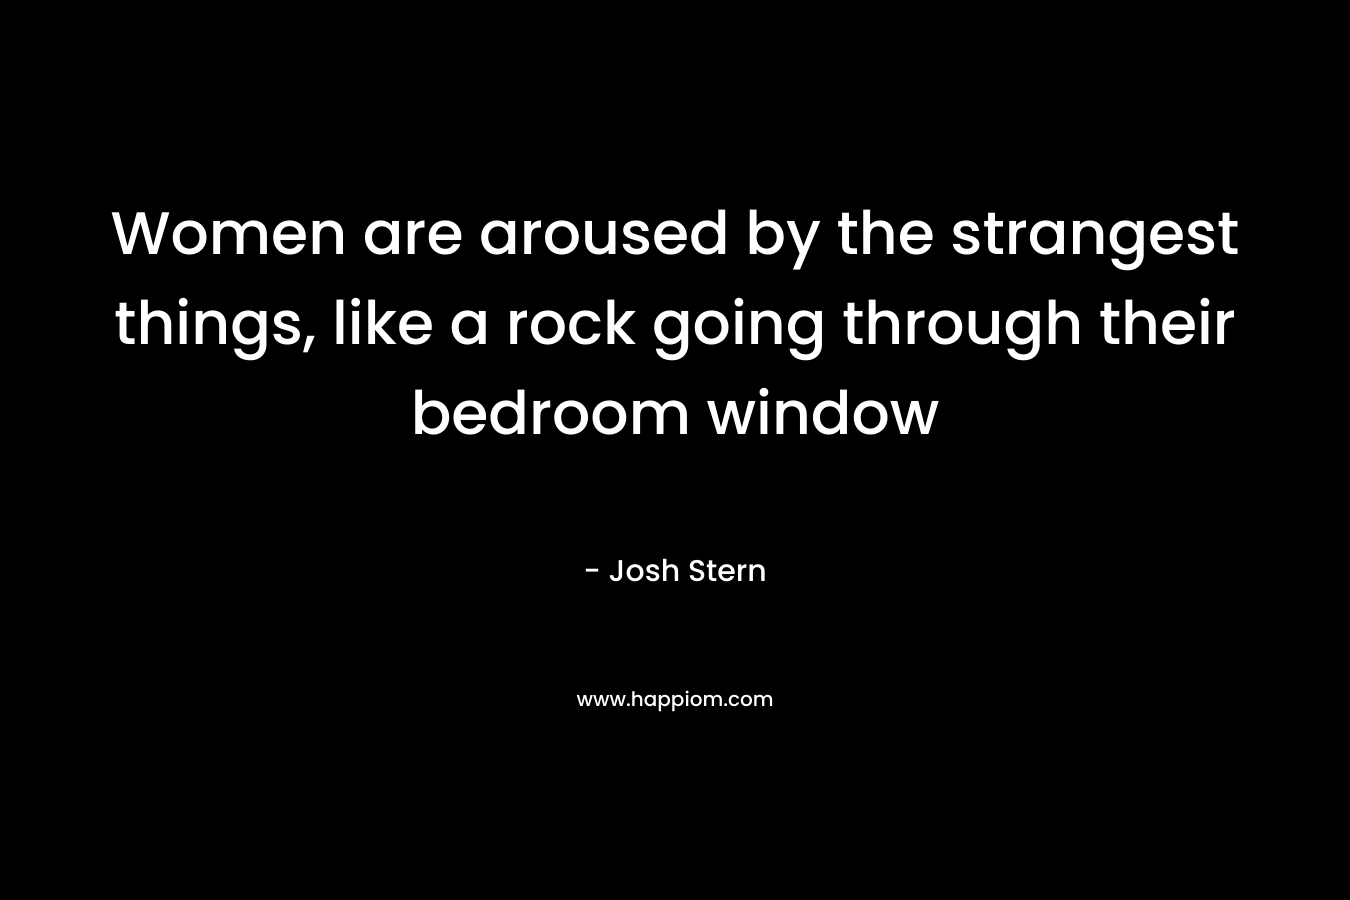 Women are aroused by the strangest things, like a rock going through their bedroom window